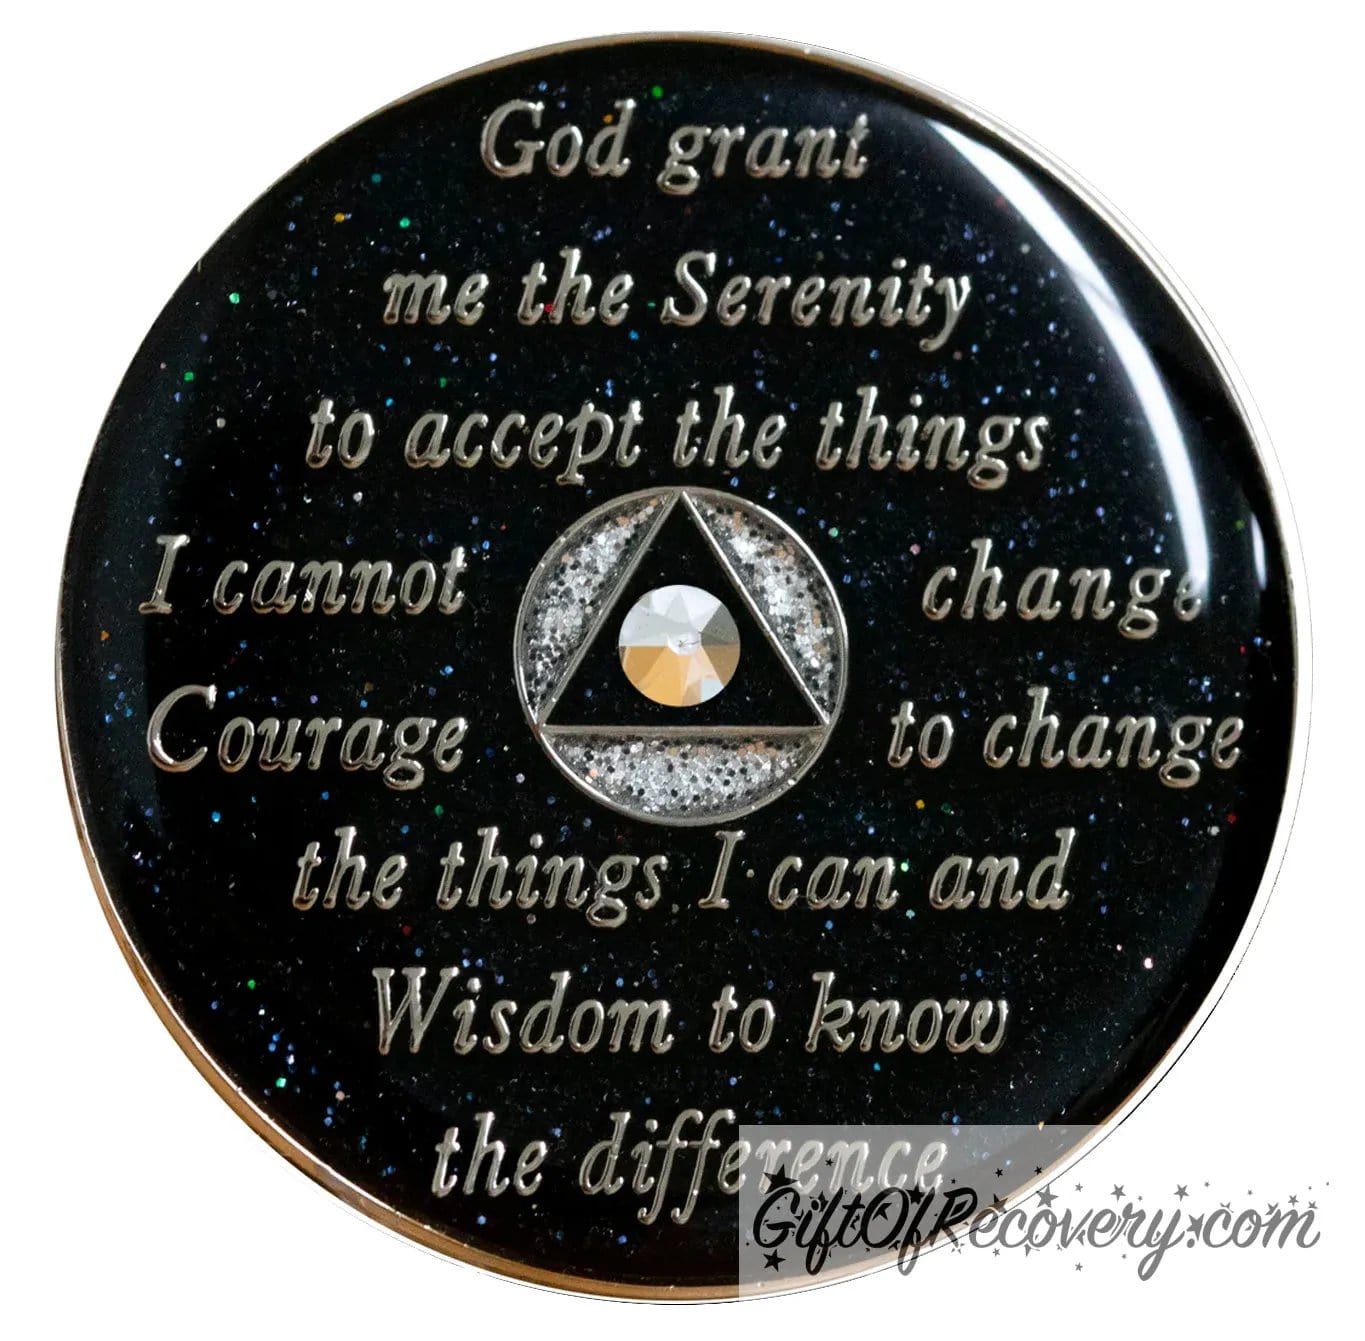 Back of AA Medallion silver and black glitter zebra print, recovery medallion is black glitter and has the raised serenity prayer, outer rim are silver, and the circle in the center is silver glitter, inside the black glitter triangle is 1 genuine comet crystal, with silver glitter accents in the circle, sealed in resin for a glossy finish.